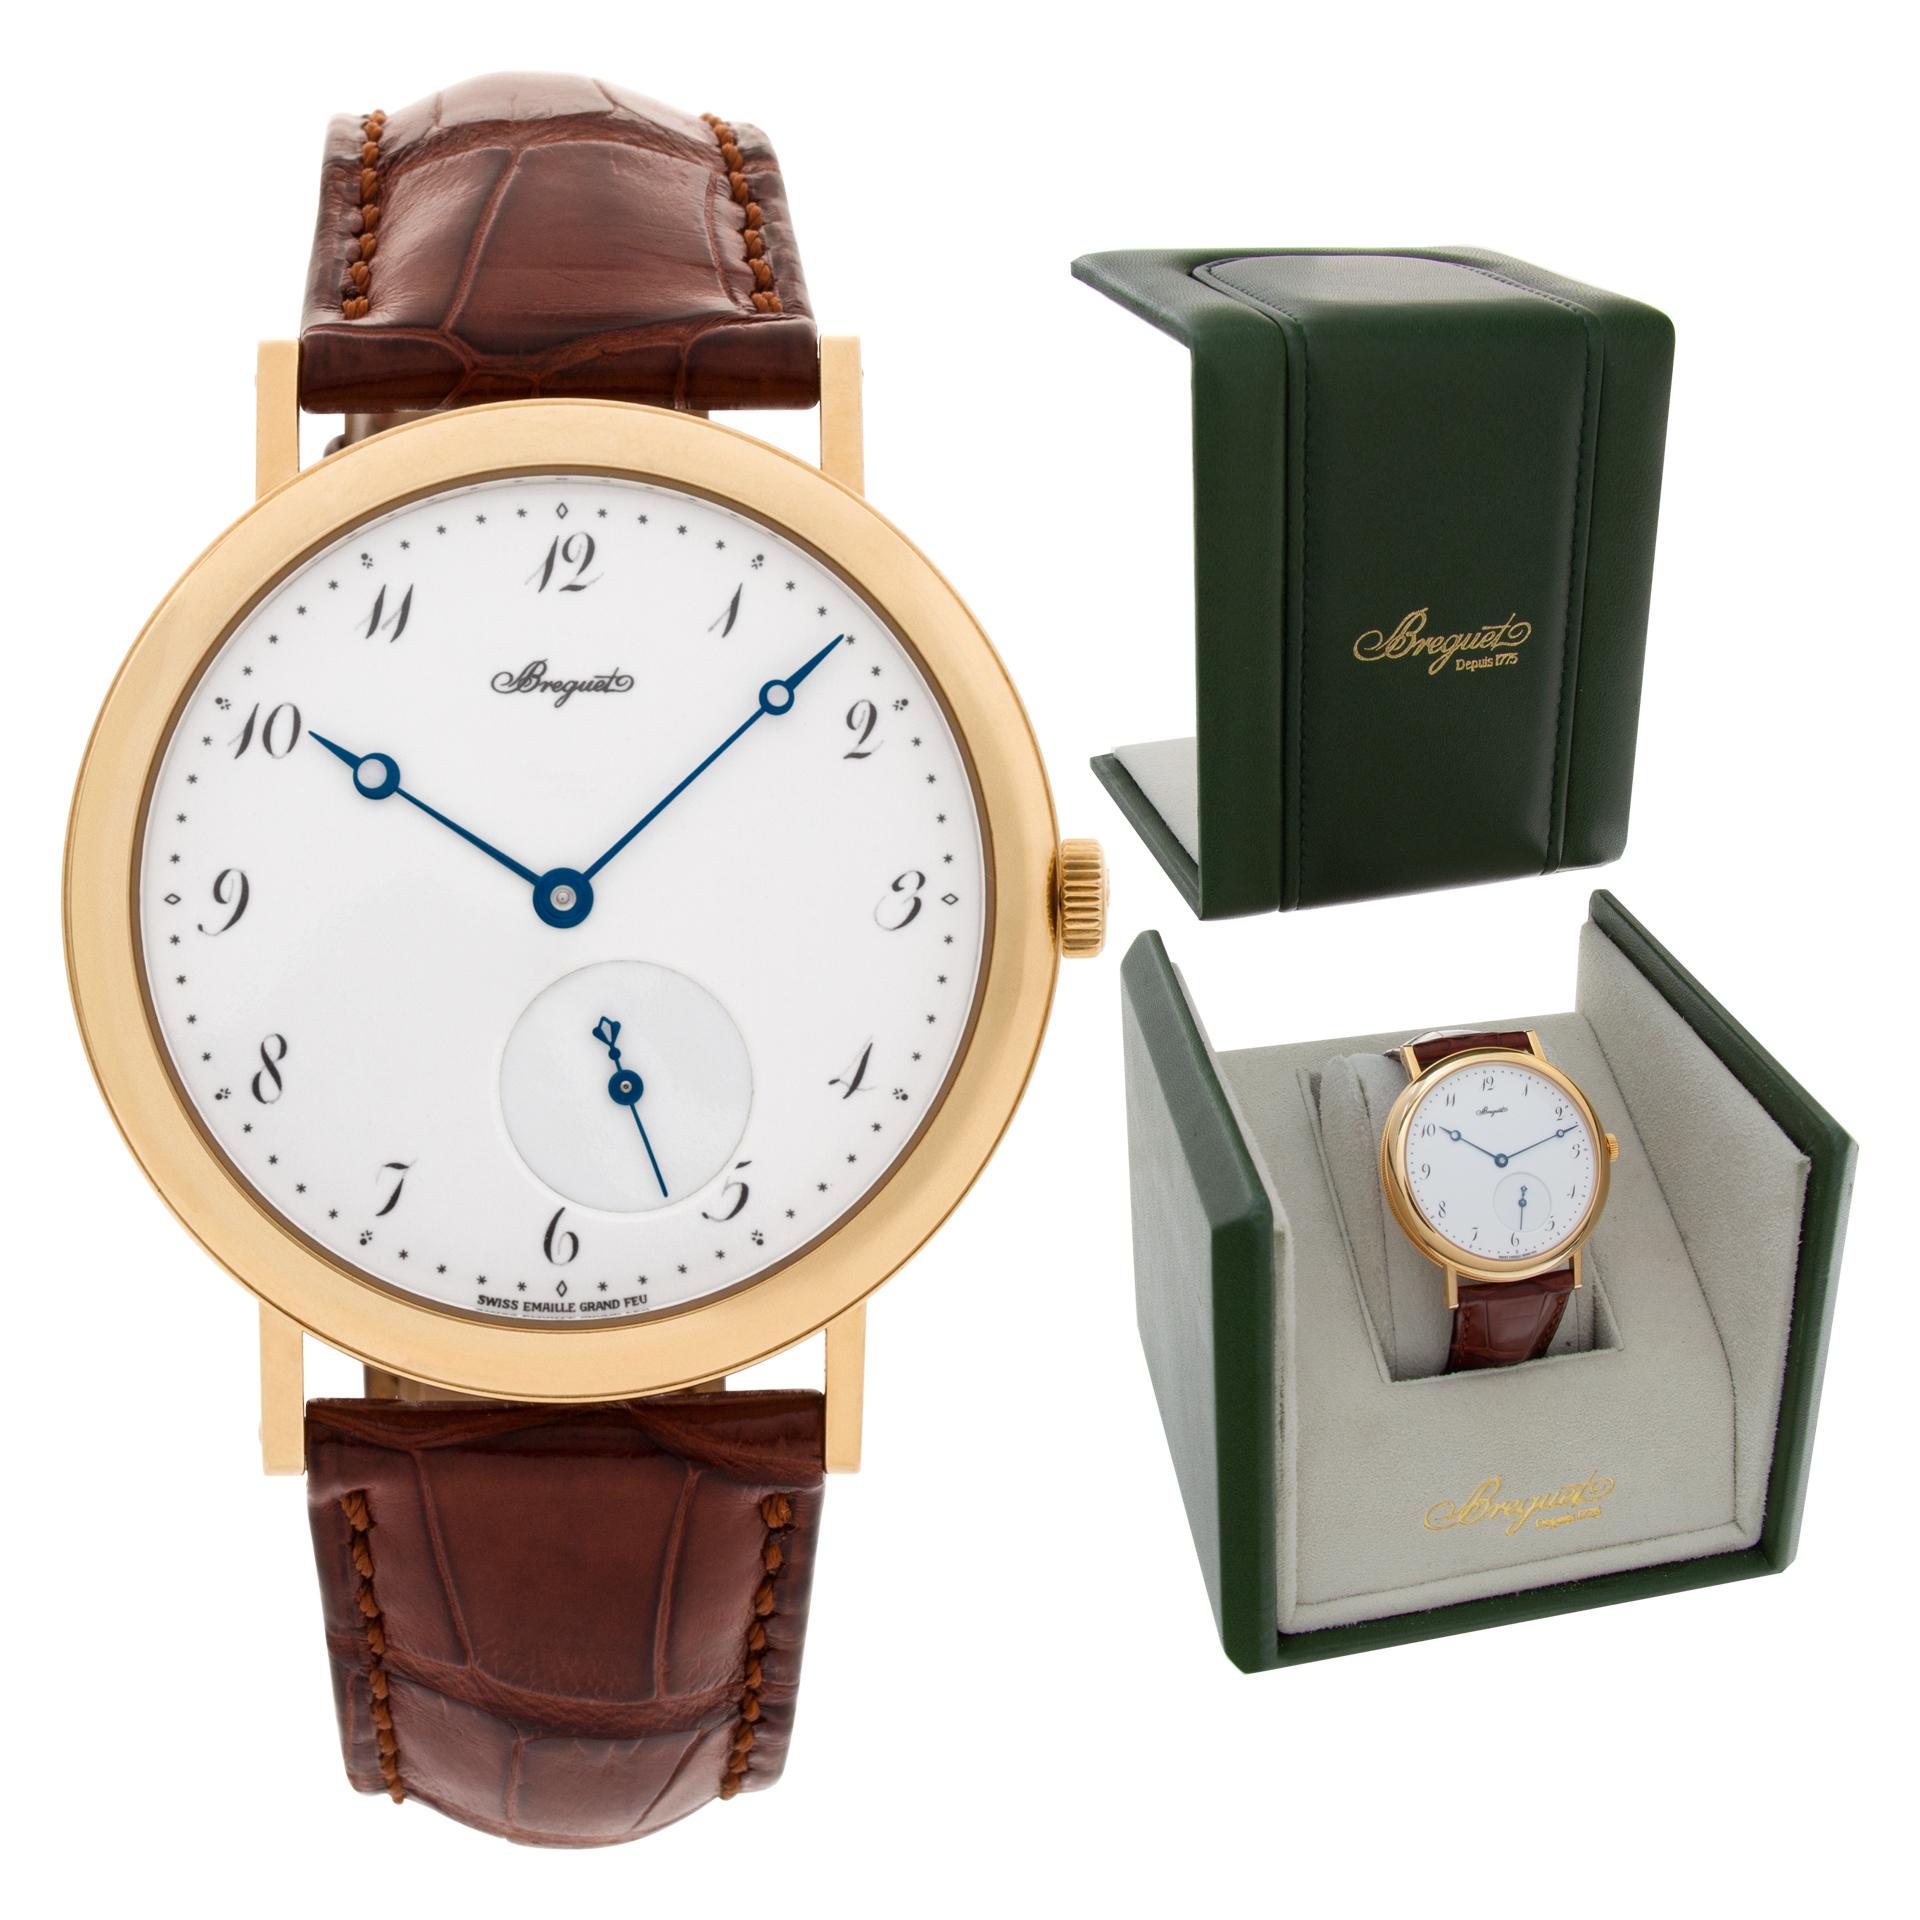 Breguet Classic in 18k on leather strap with 18k tang buckle. Auto w/ subseconds. 40 mm case size. With box. Ref 5140. Fine Pre-owned Breguet Watch.

Certified preowned Classic Breguet Classic 5140 watch is made out of yellow gold on a Brown Leather